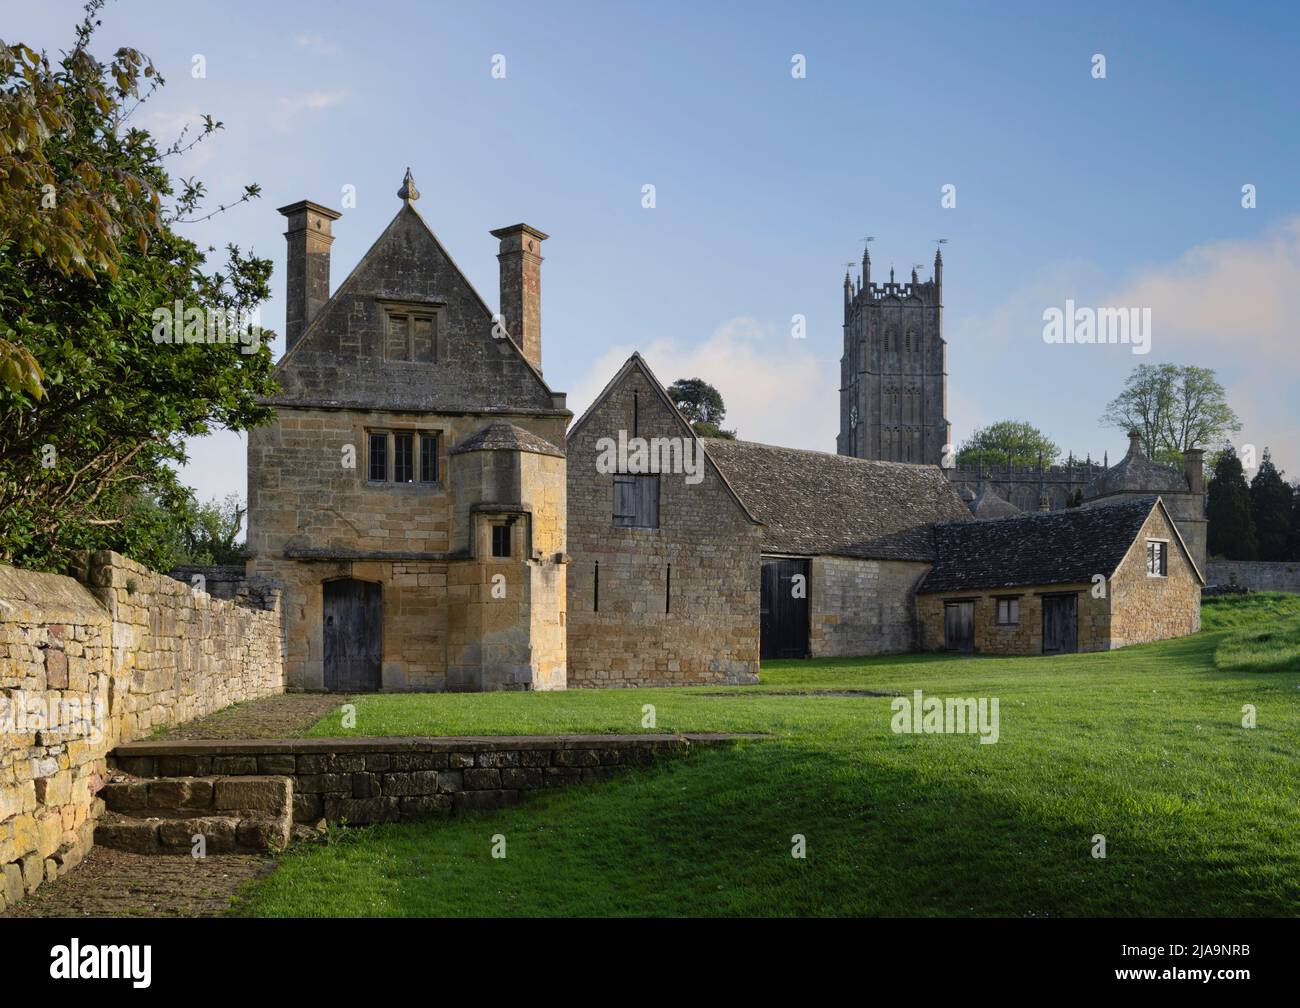 Church and Banqueting House at Chipping Campden, Cotswolds, England. Stock Photo